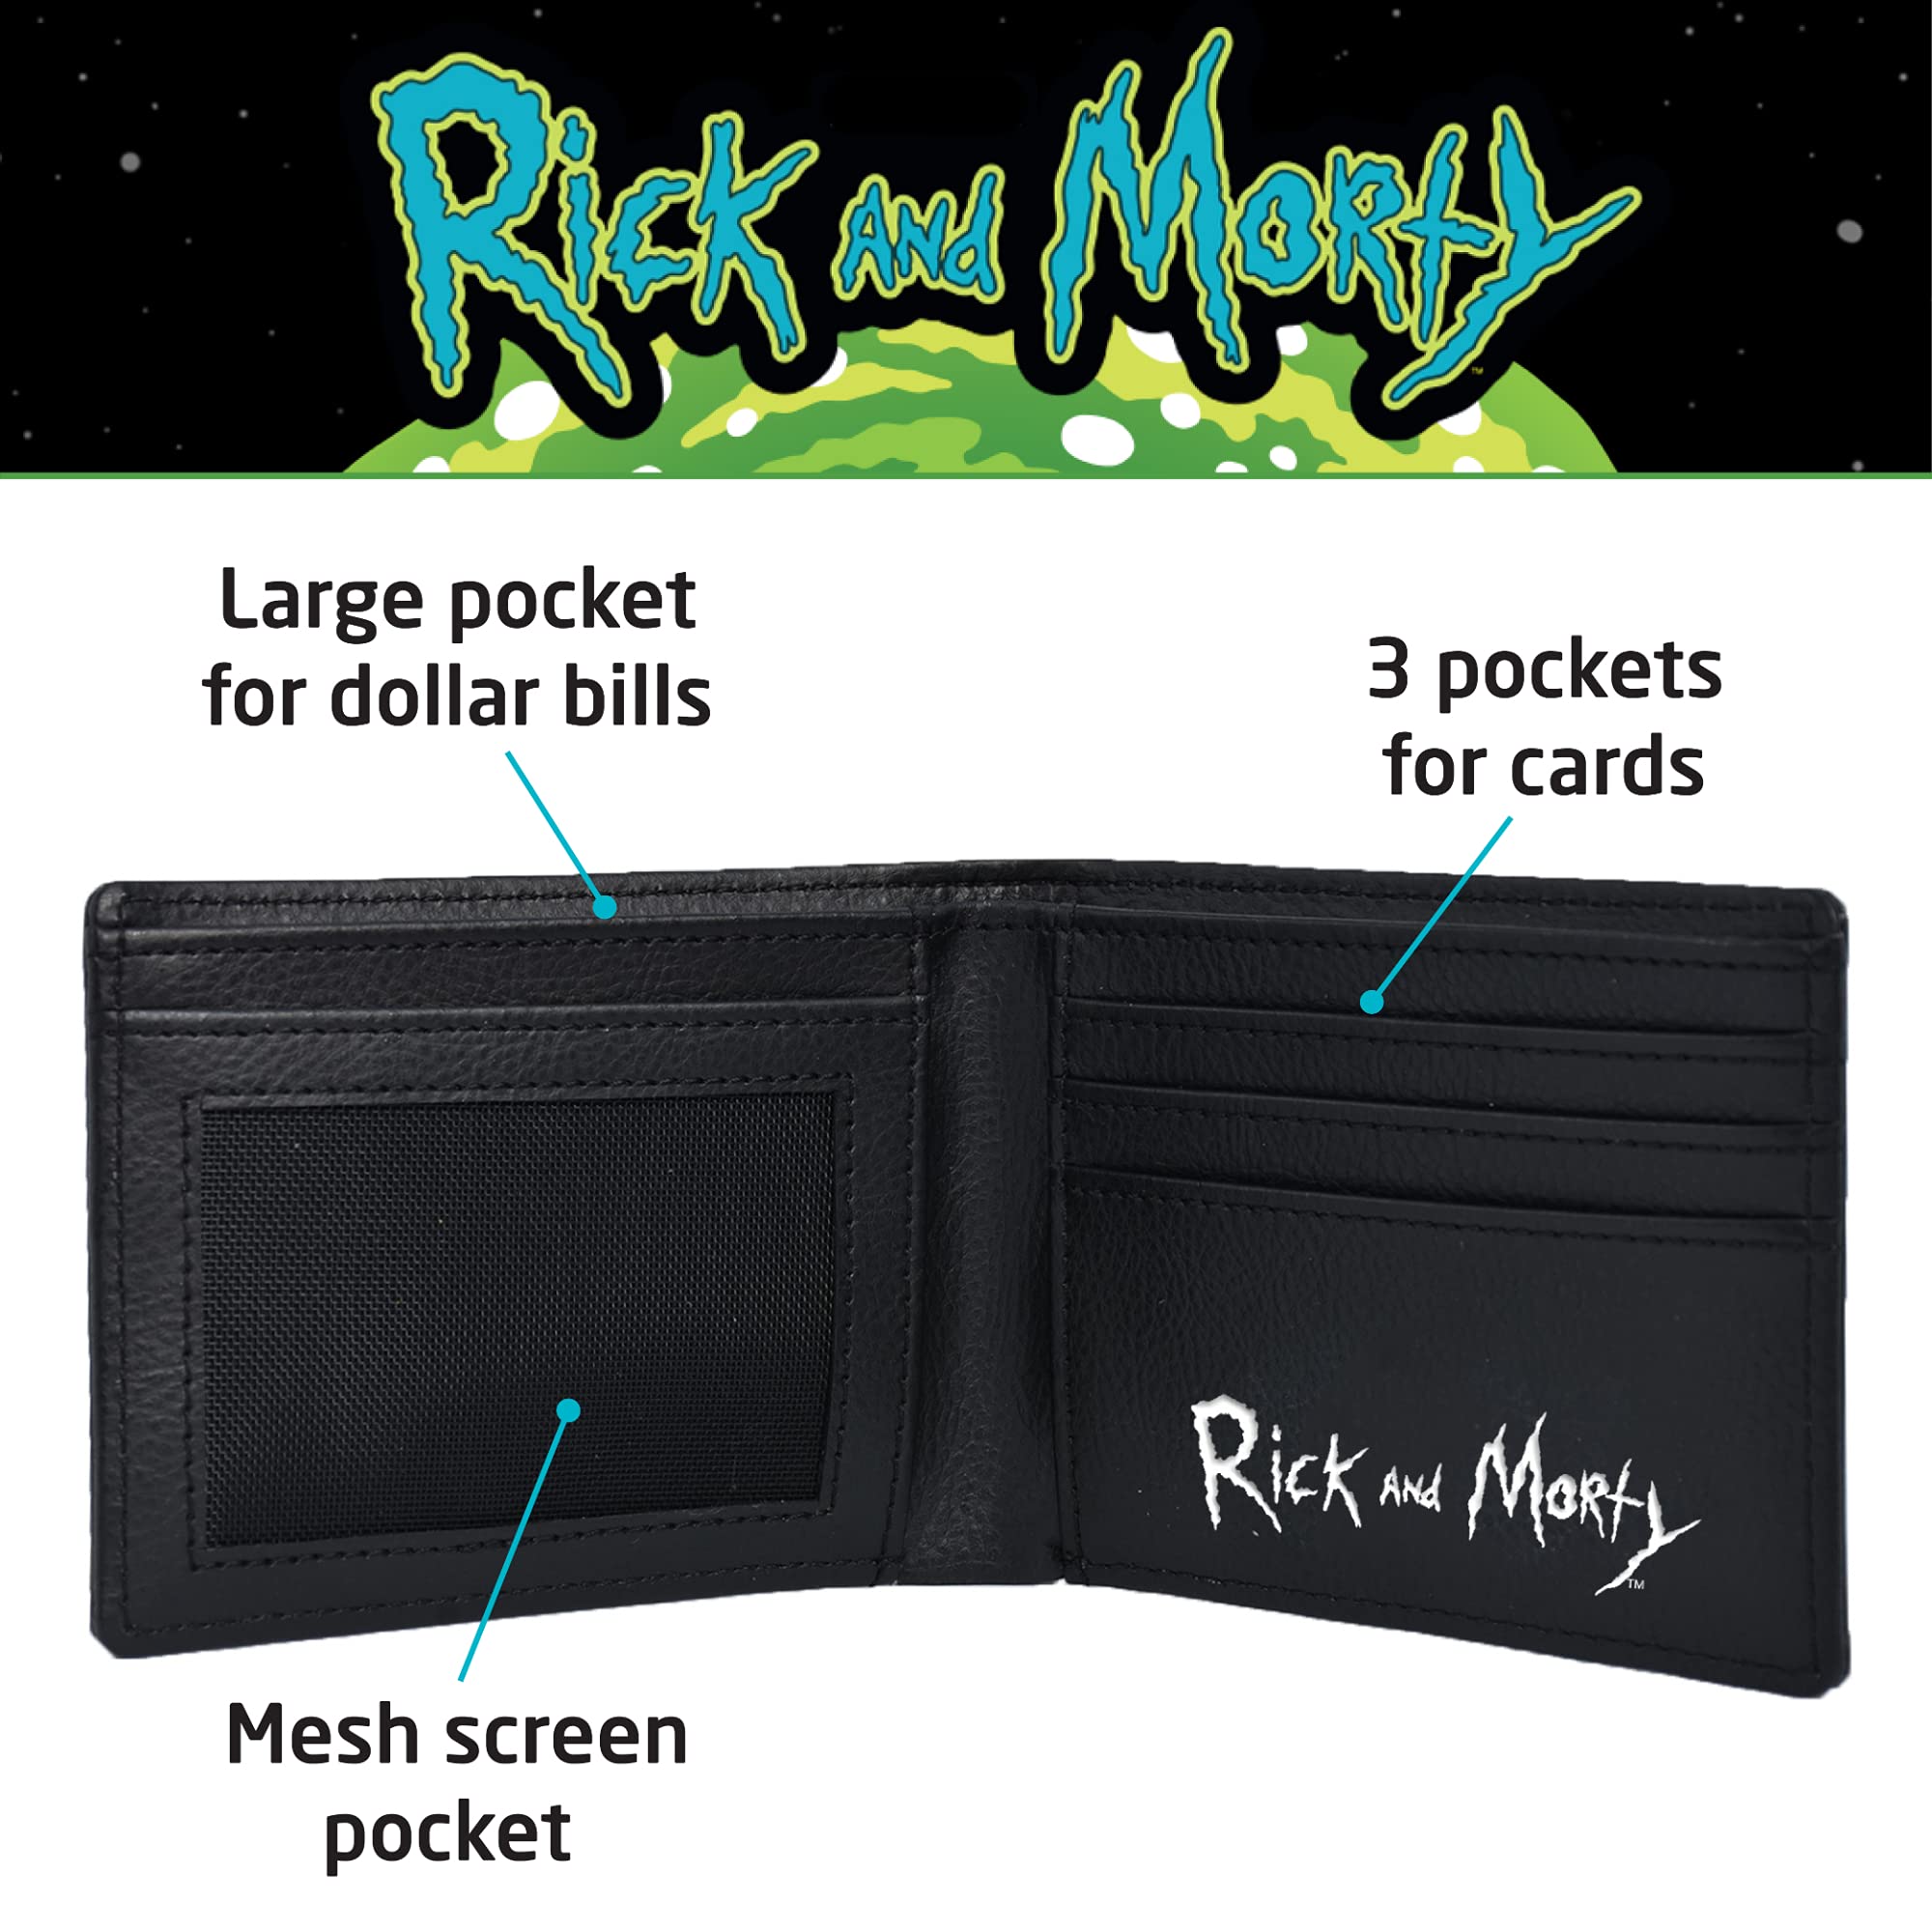 Adult Swim's Rick and Morty Bifold Wallet in a Decorative Tin Case, Multi